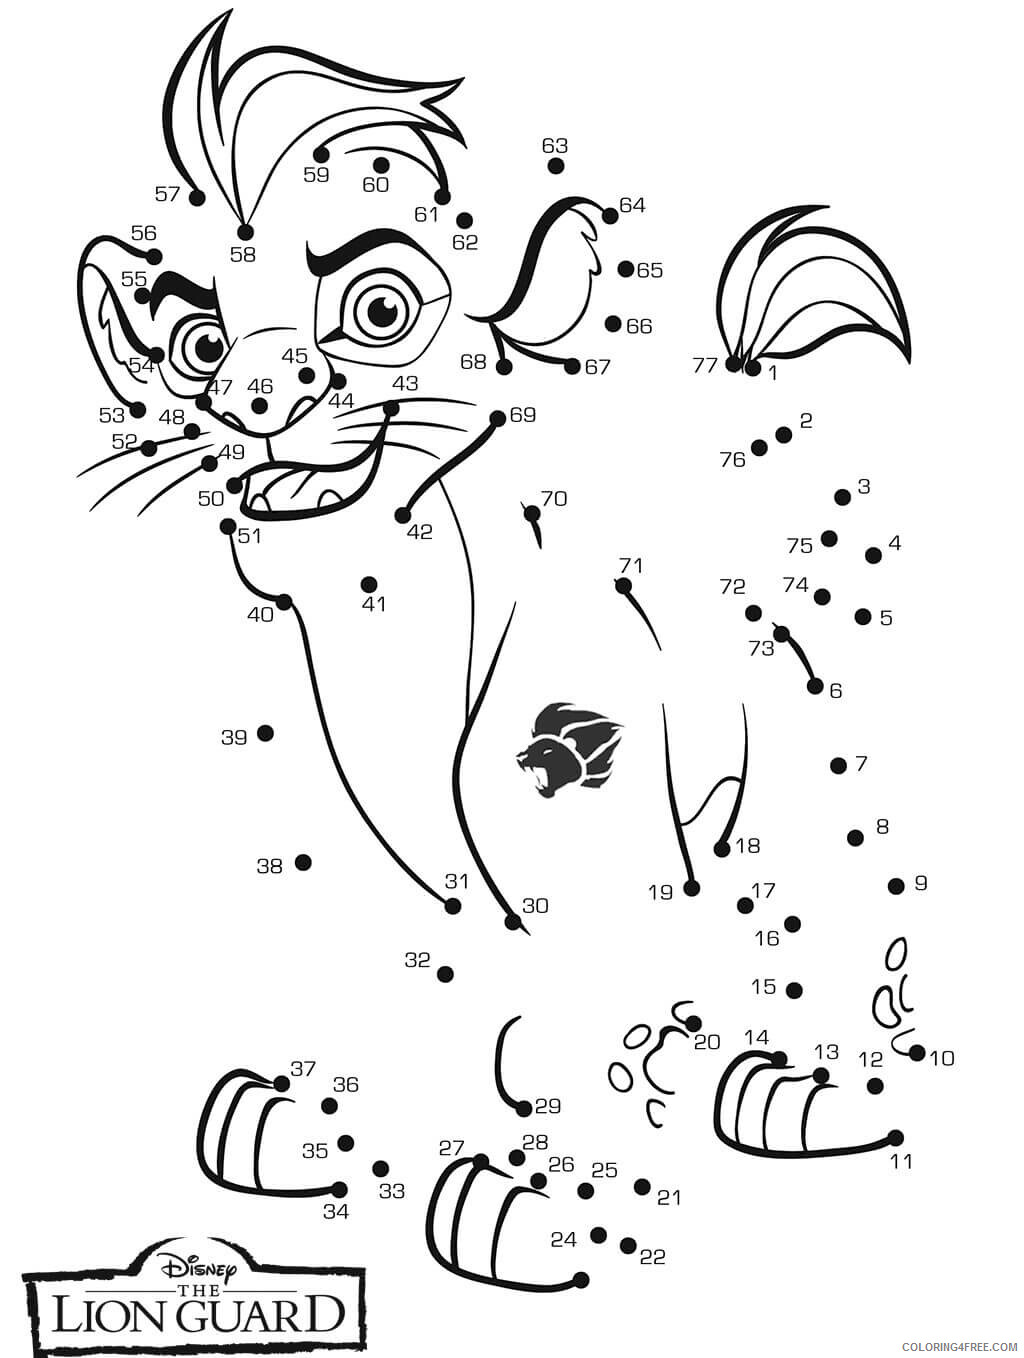 The Lion Guard Coloring Pages TV Film Dot to Dot Printable 2020 09105 Coloring4free